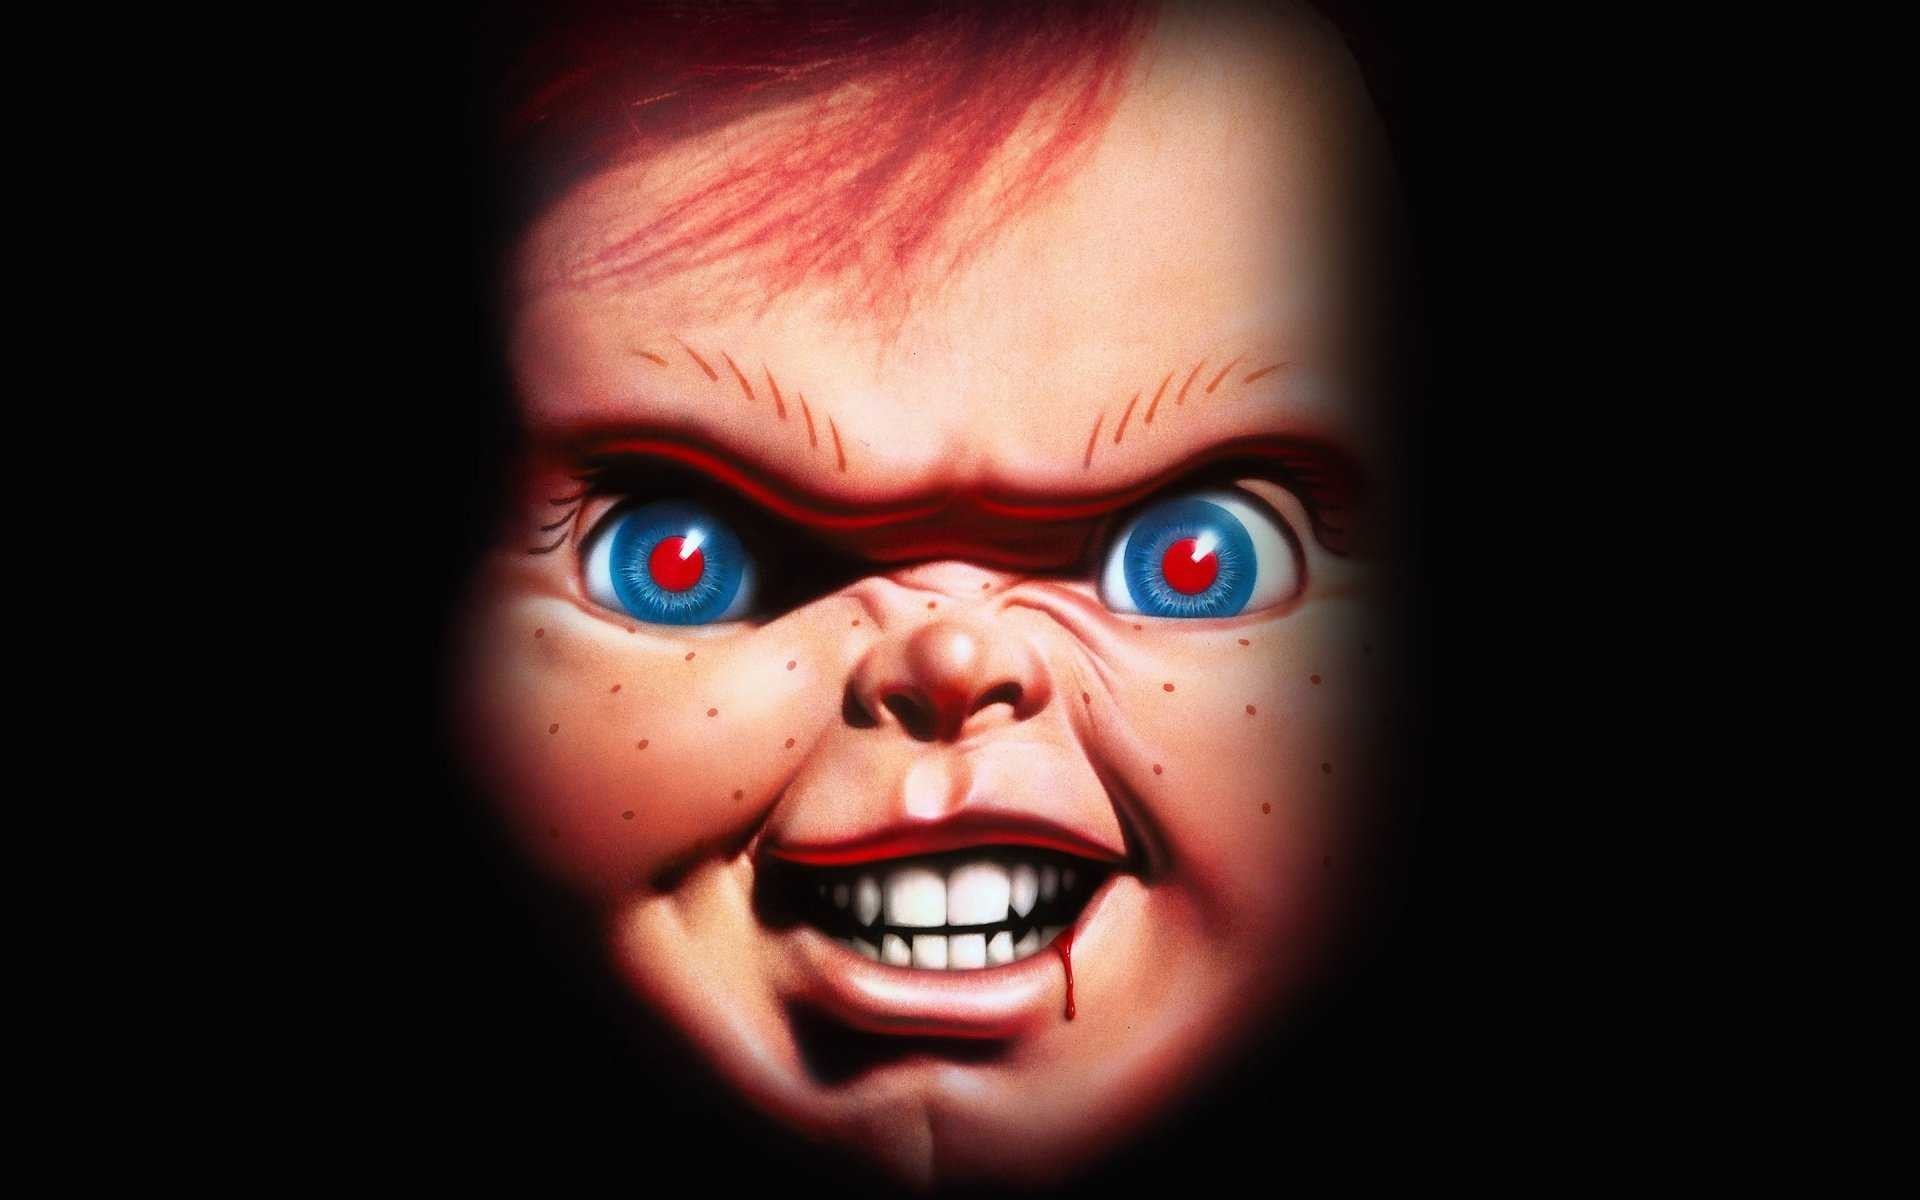 Chucky Hd Movie Wallpapers